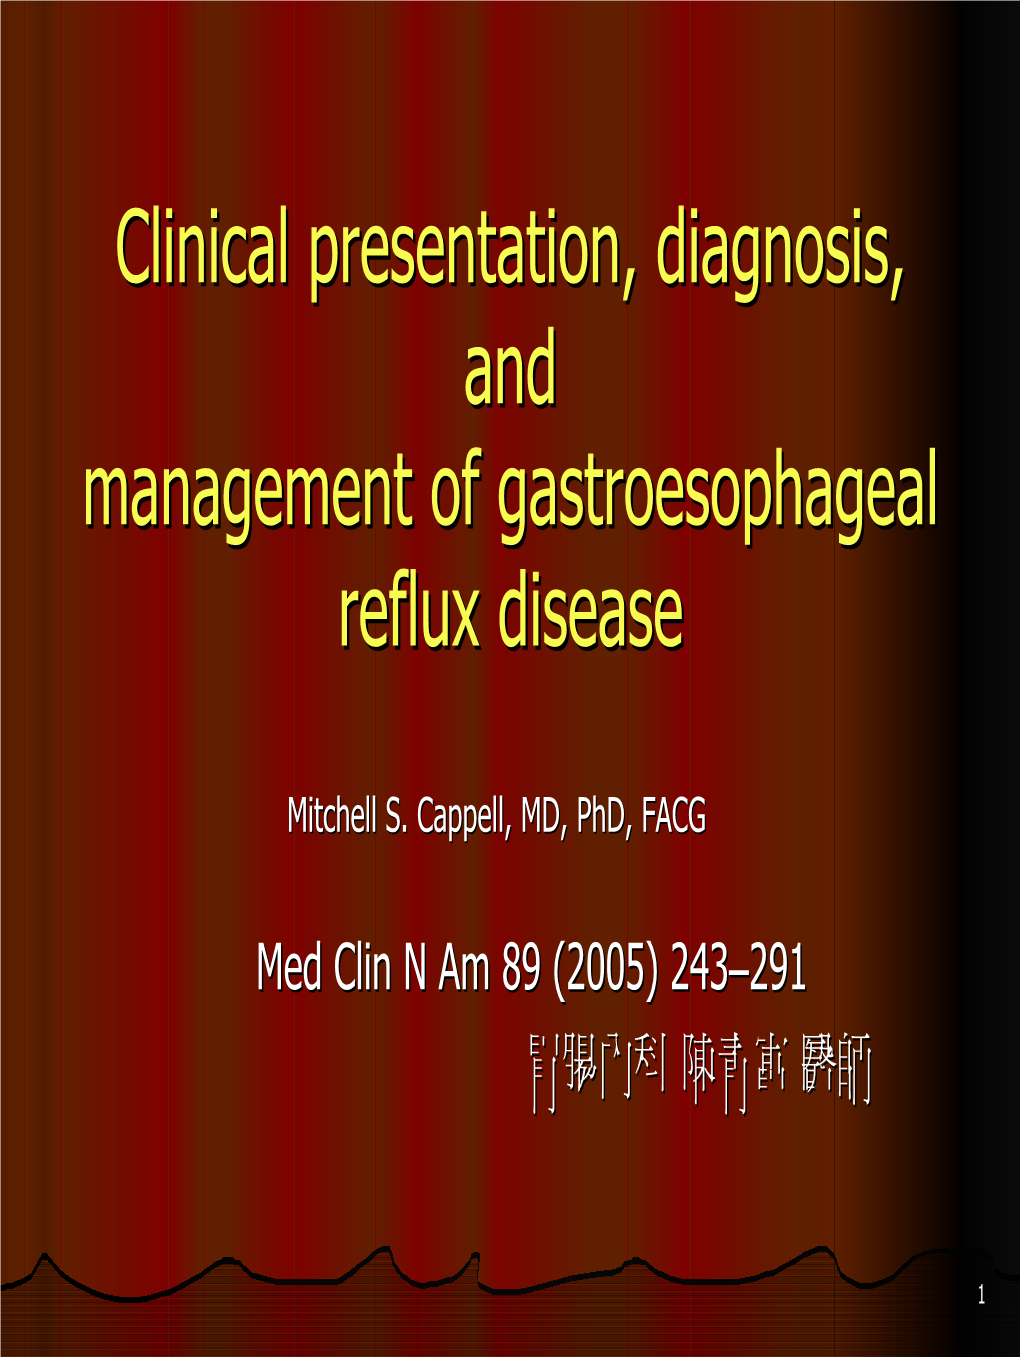 Clinical Presentation, Diagnosis, and Management of Gastroesophageal